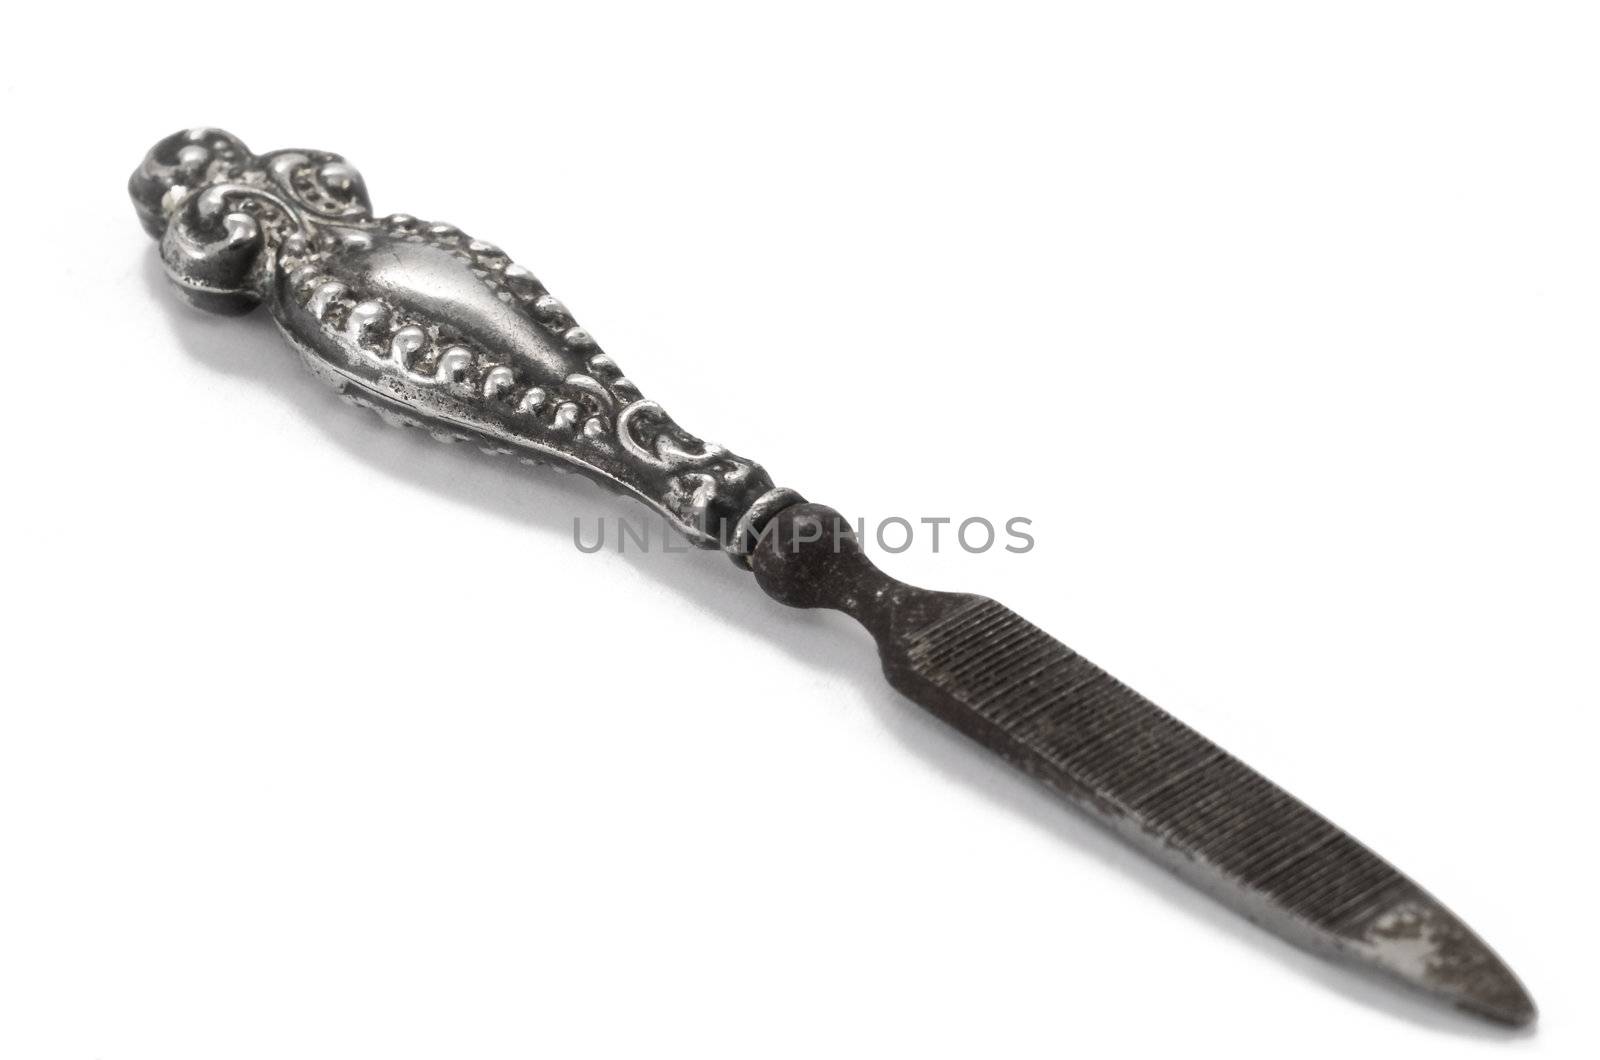 Antique silver nail file with ornate handle